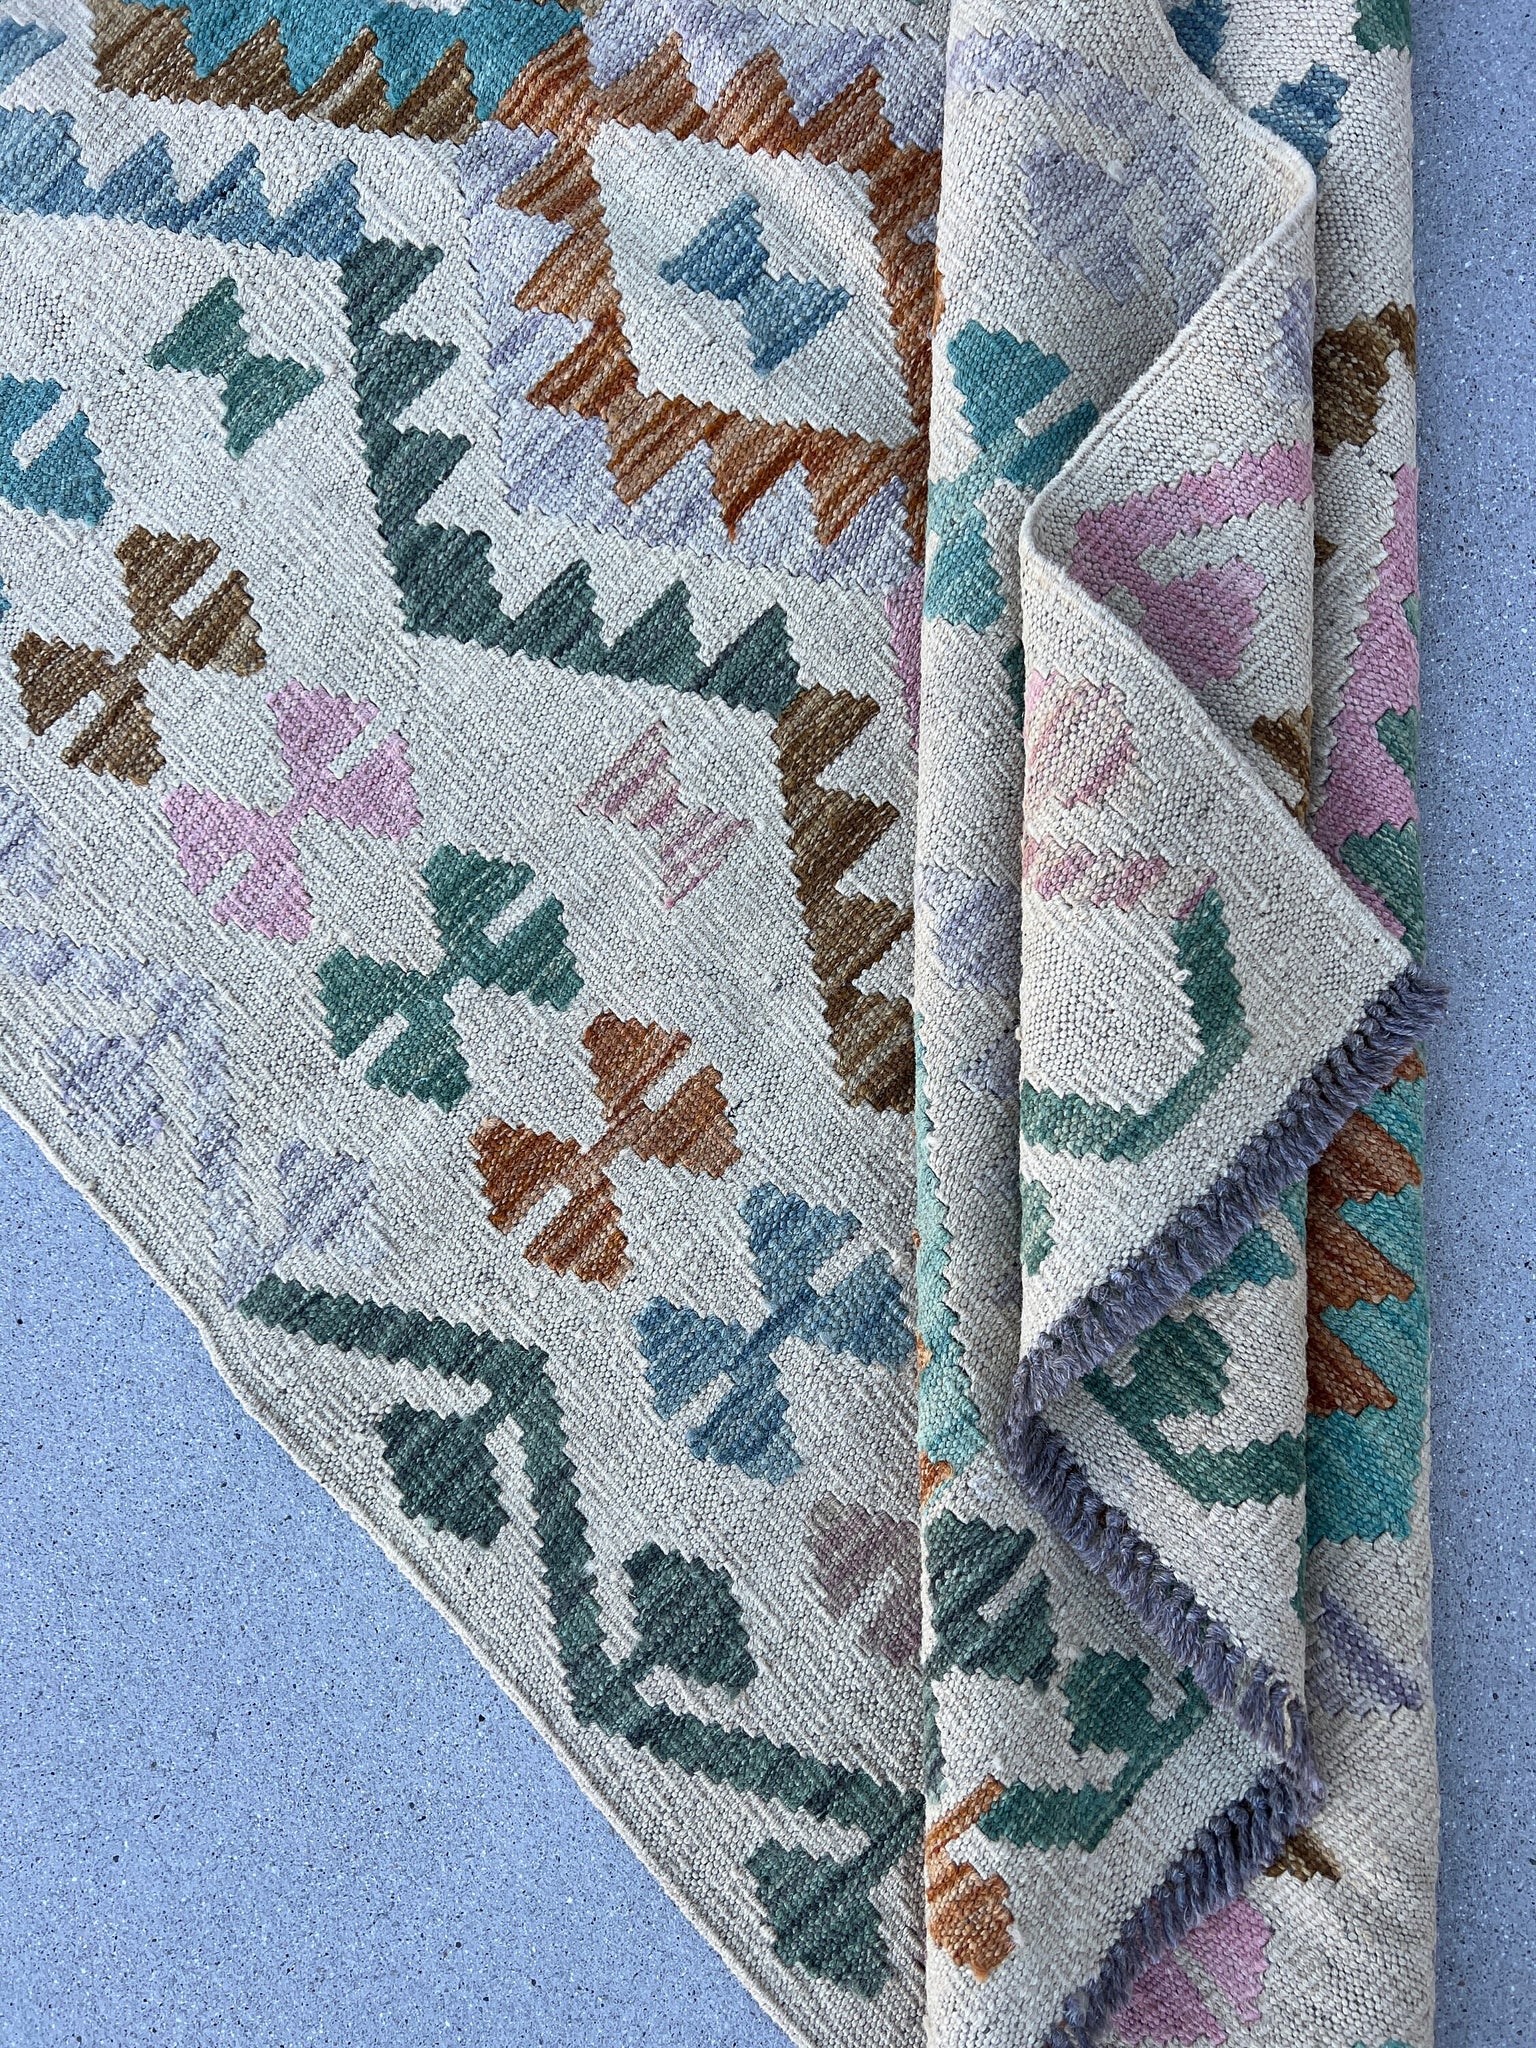 3x5 (100x180) Handmade Afghan Kilim Rug | Cream Beige Taupe Teal Sky Blue Lavender Baby Pink Forest Green | Hand Knotted Geometric Wool